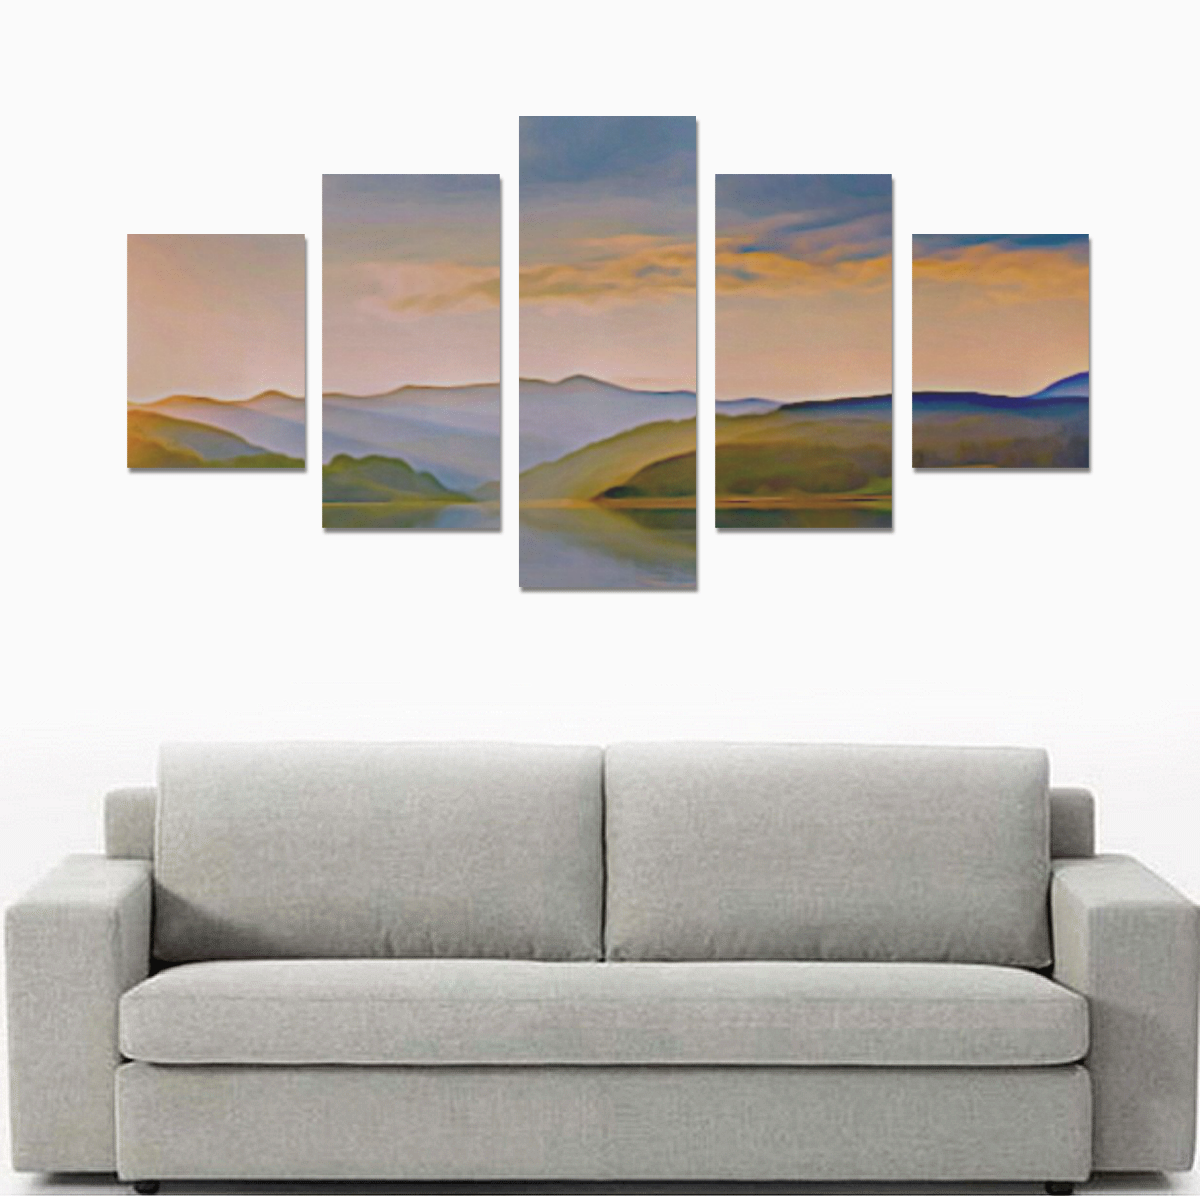 Travel to sunset 01 by JamColors Canvas Print Sets B (No Frame)